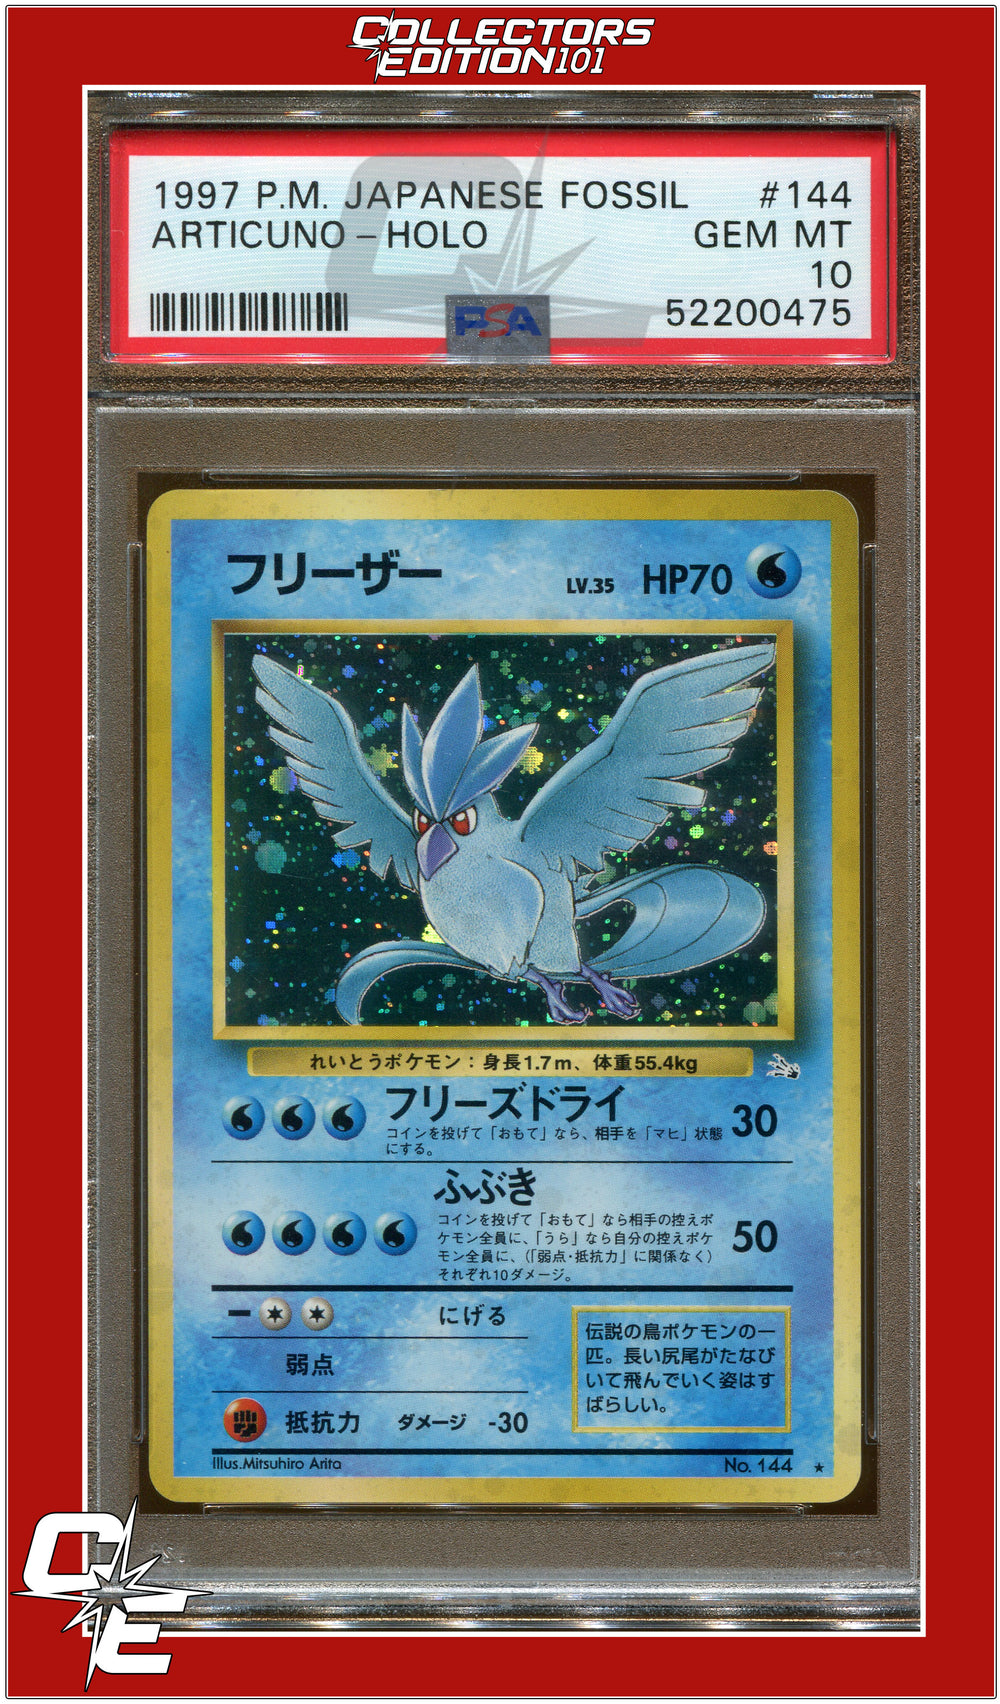 Japanese Fossil 144 Articuno Holo PSA 10